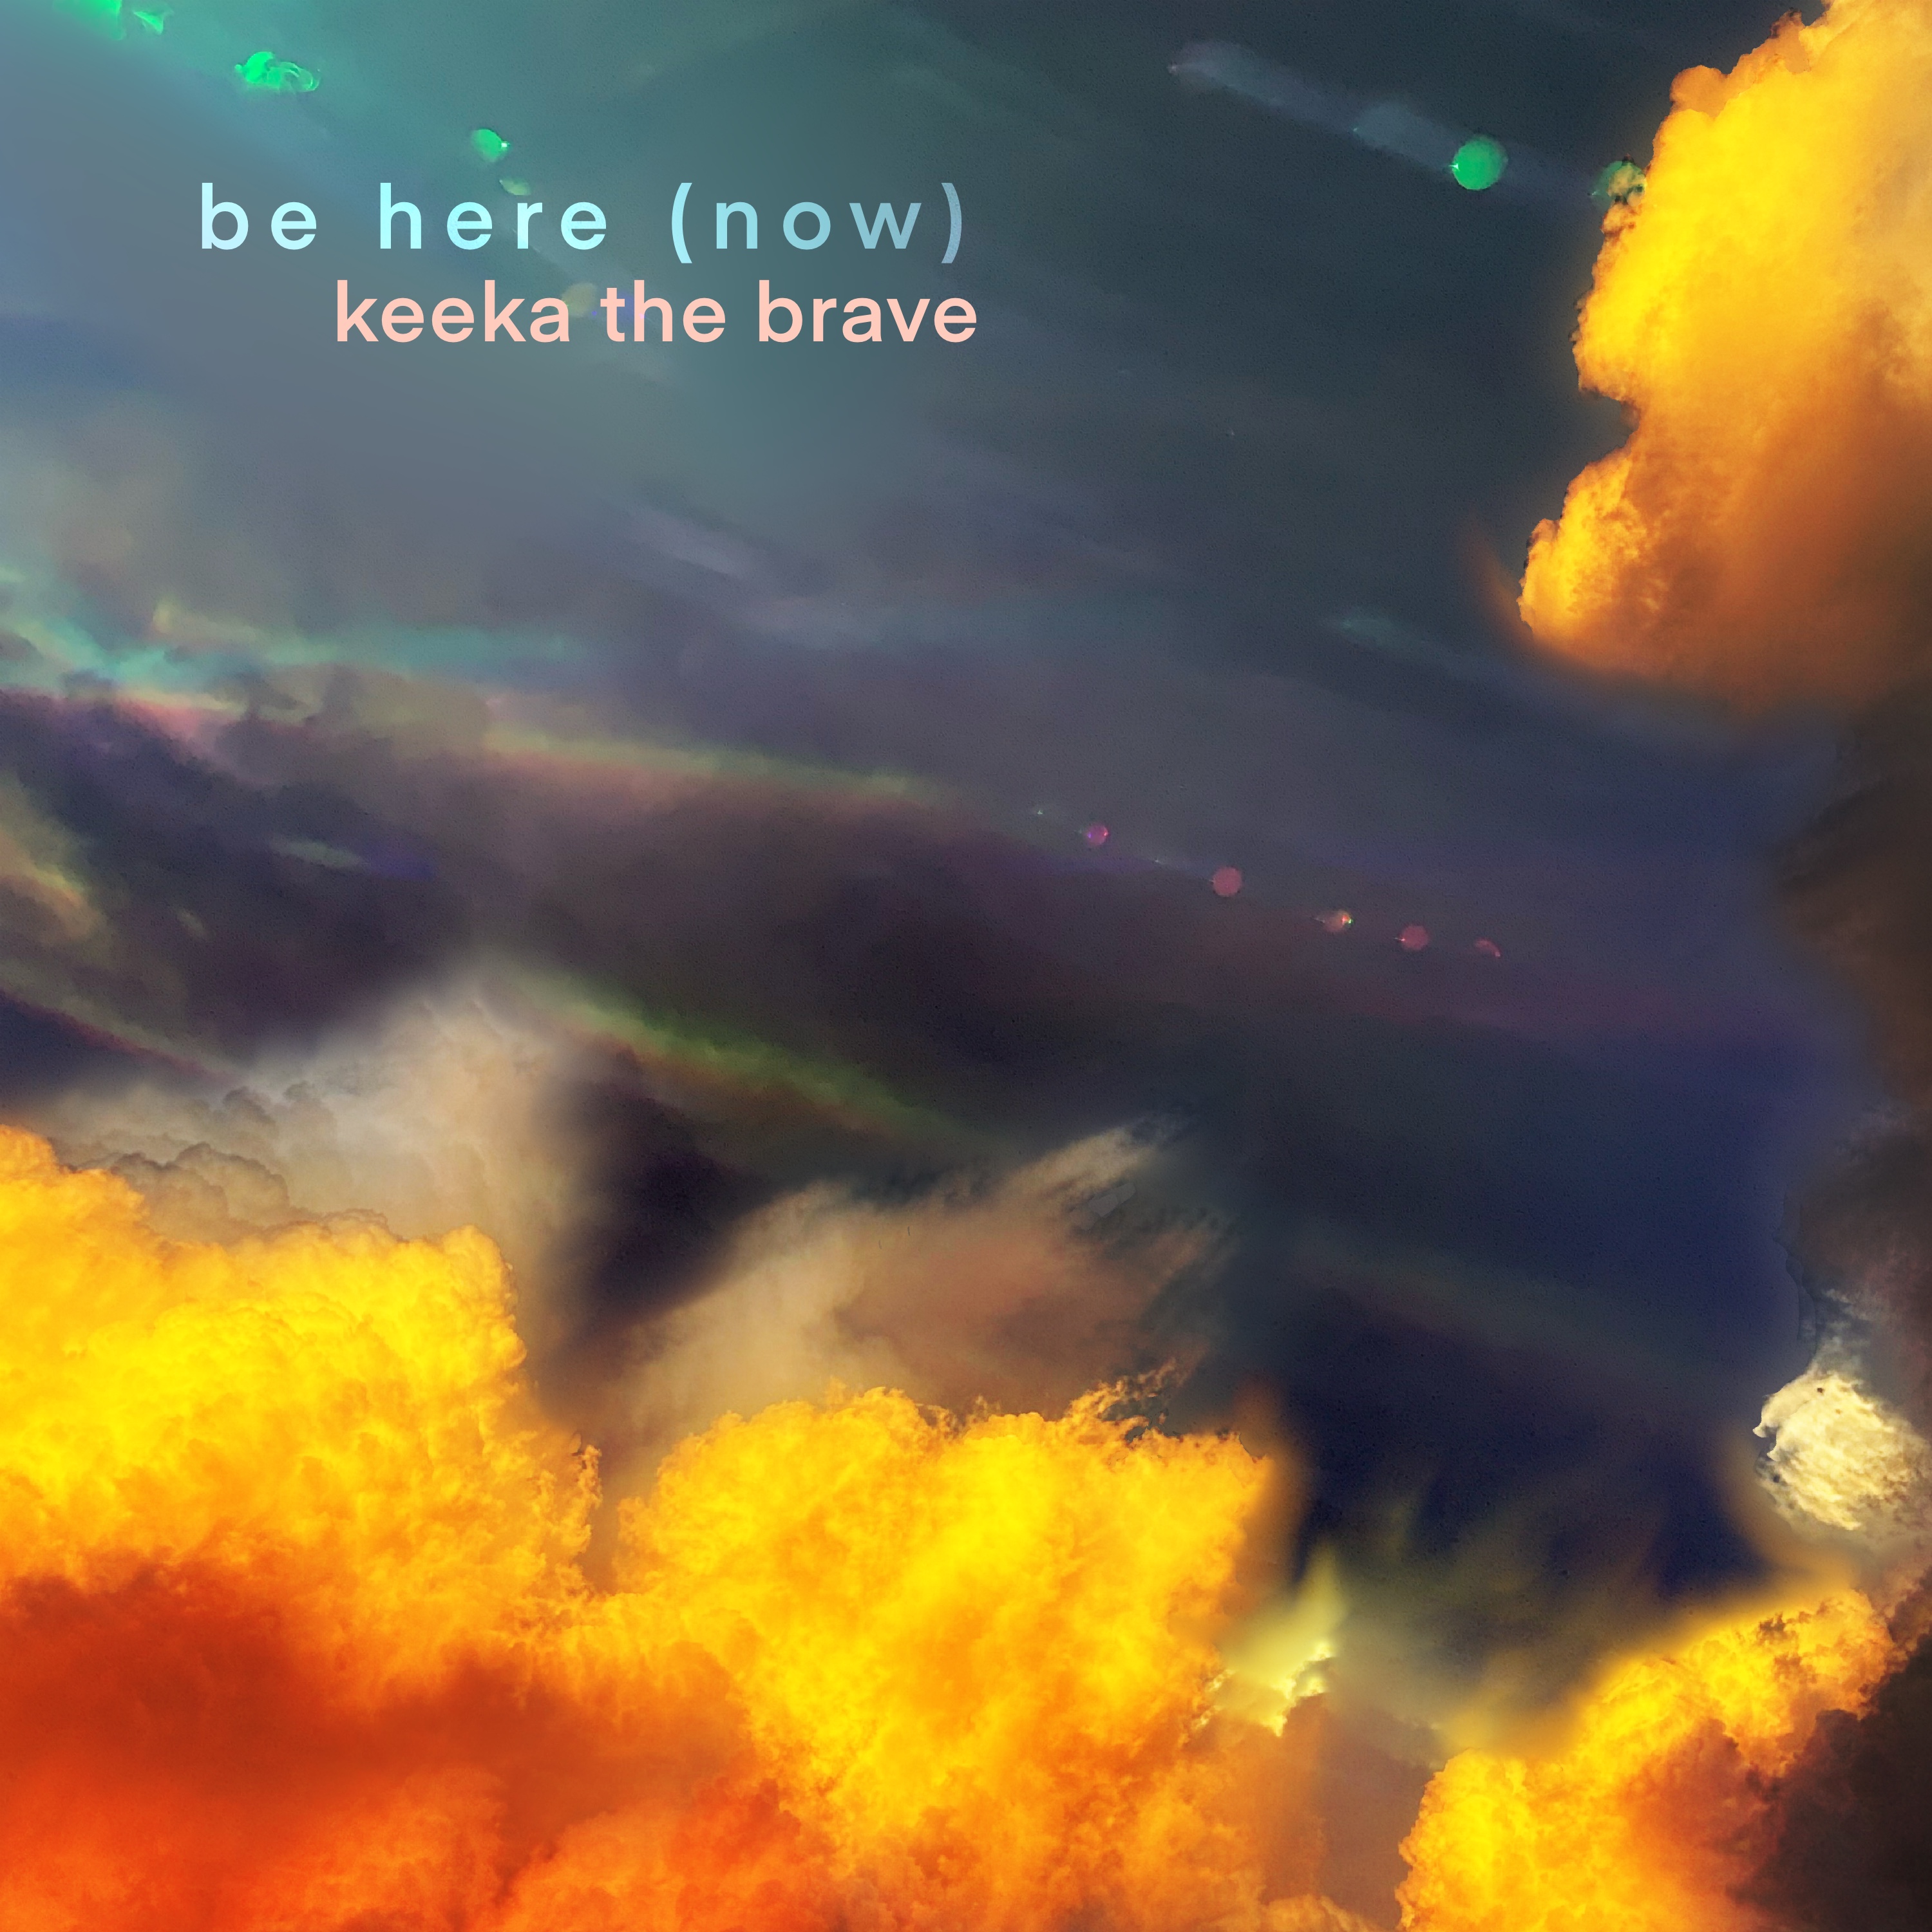 Keeka The Brave – “Be Here (Now)”